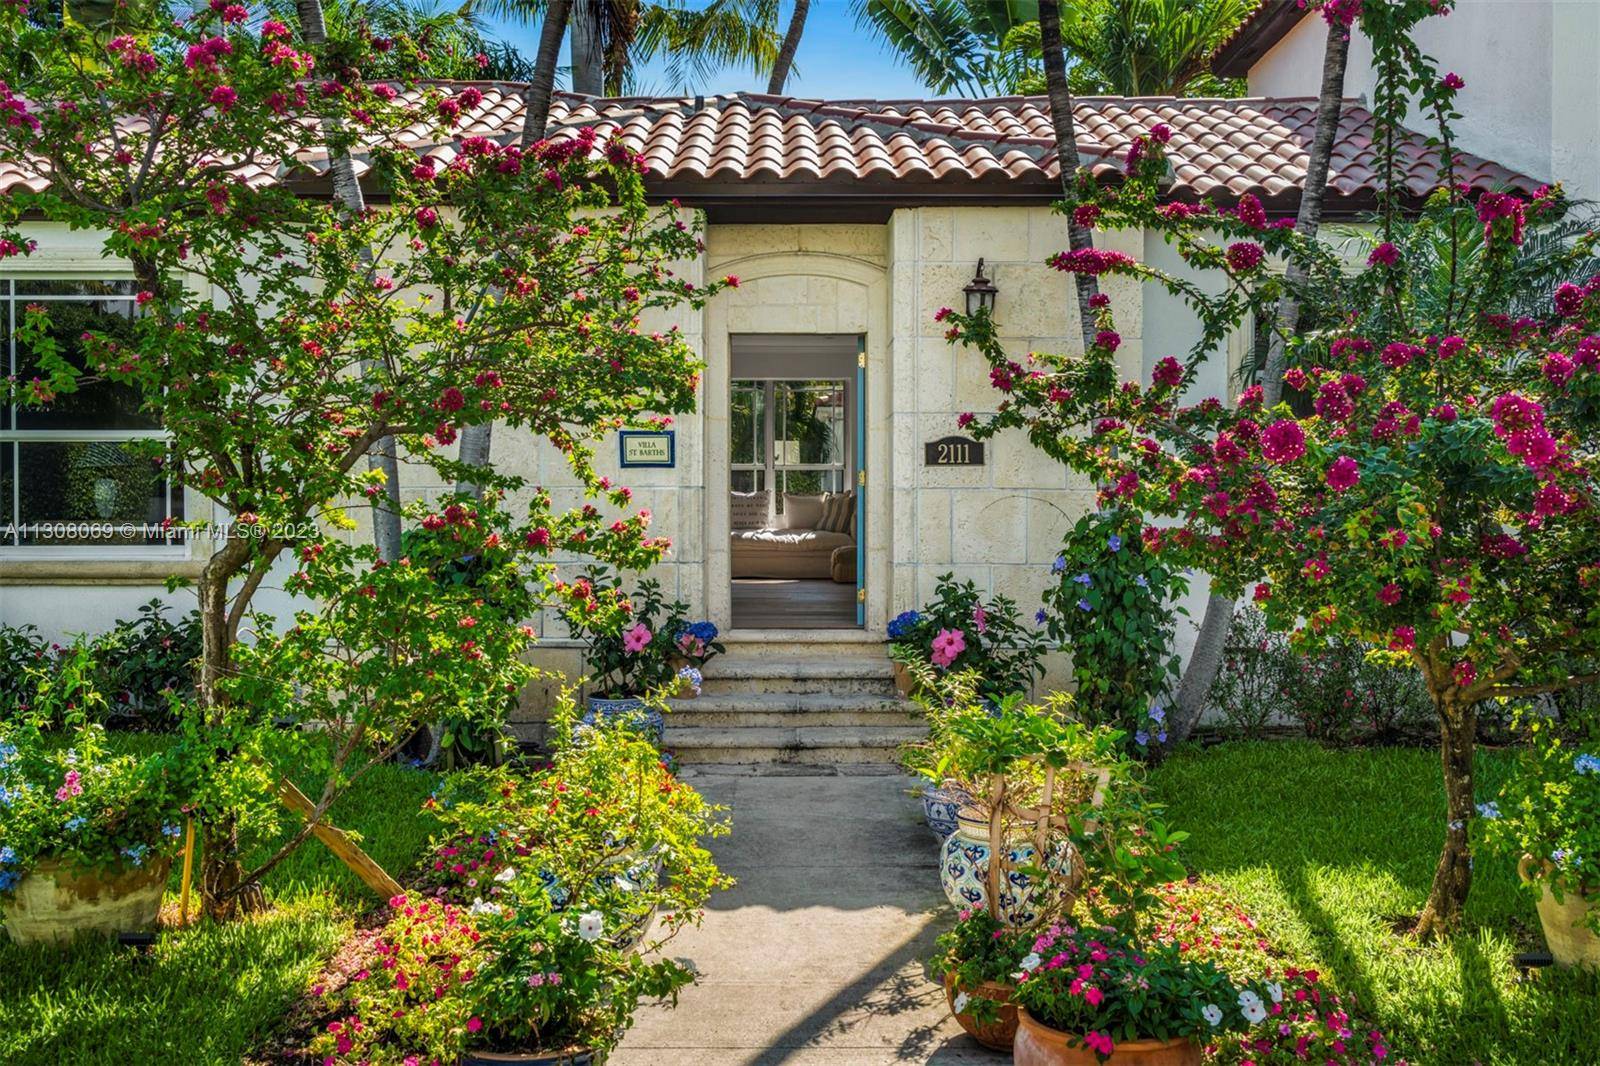 Live on the coveted Sunset Islands in this 4 bedroom, 4 full bathroom, 1 half bath, residence.